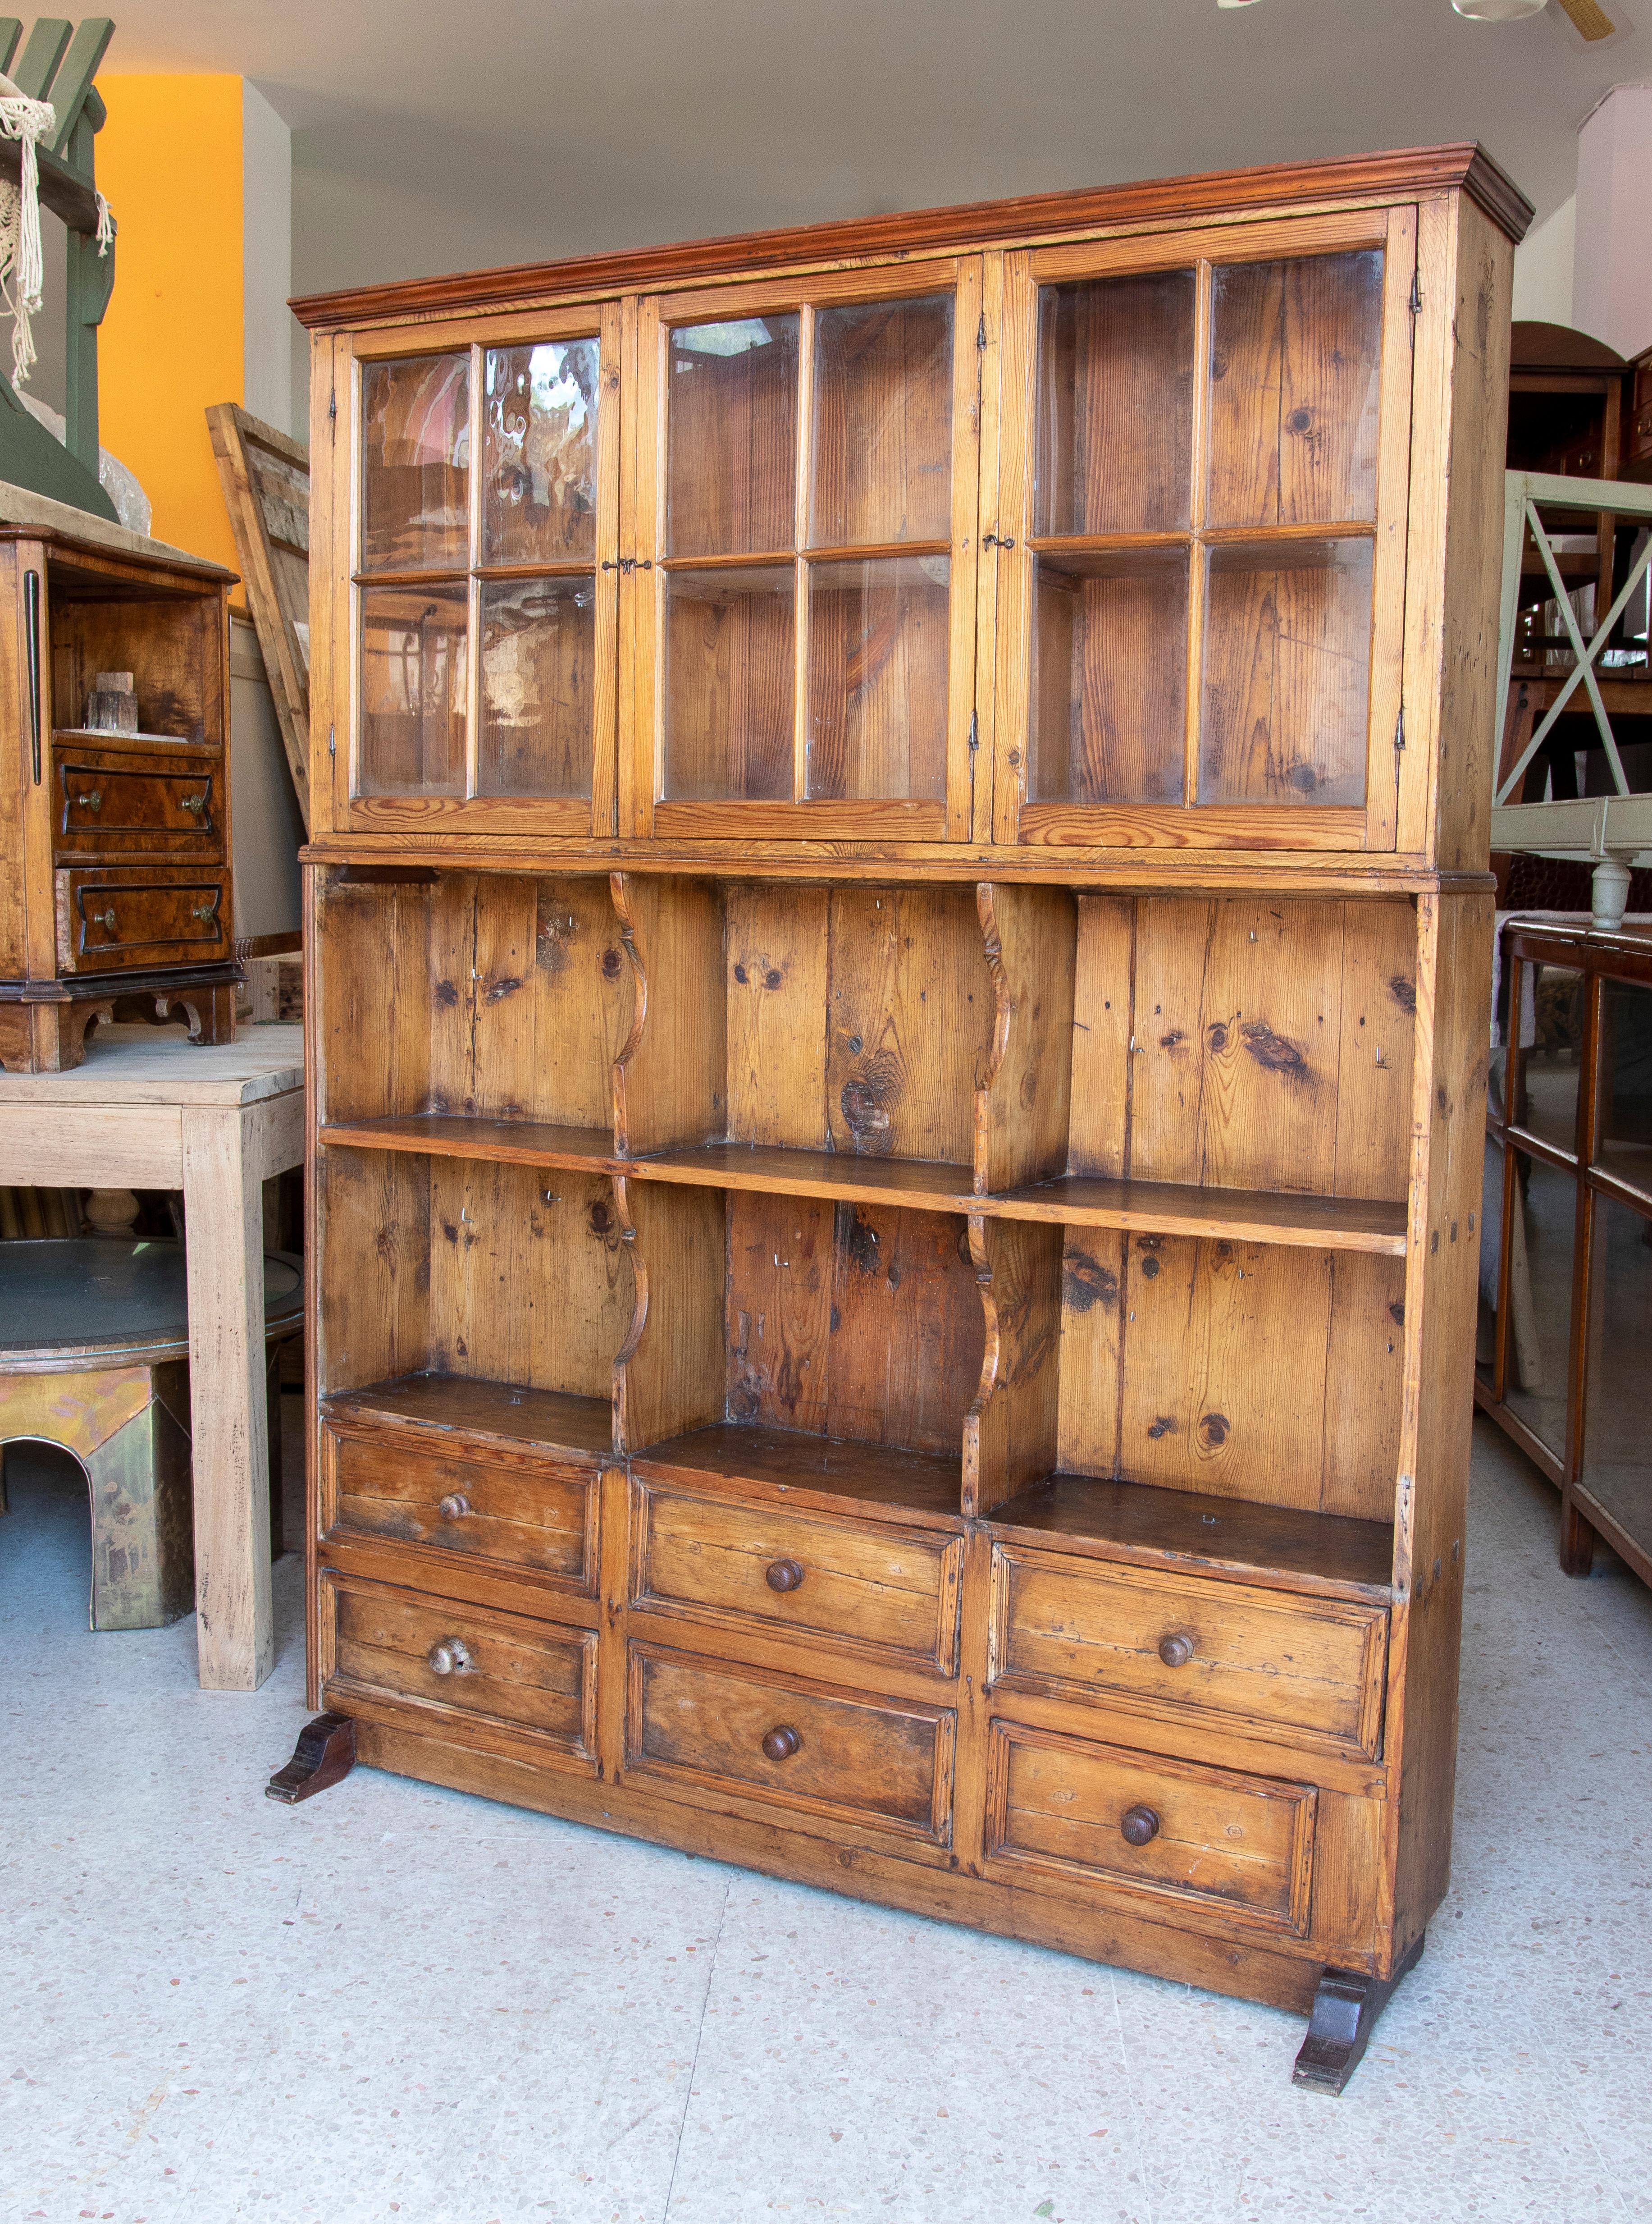 Spanish Rustic Kitchen Display Cabinet with Doors, Shelves and Drawers in the Lower Part For Sale